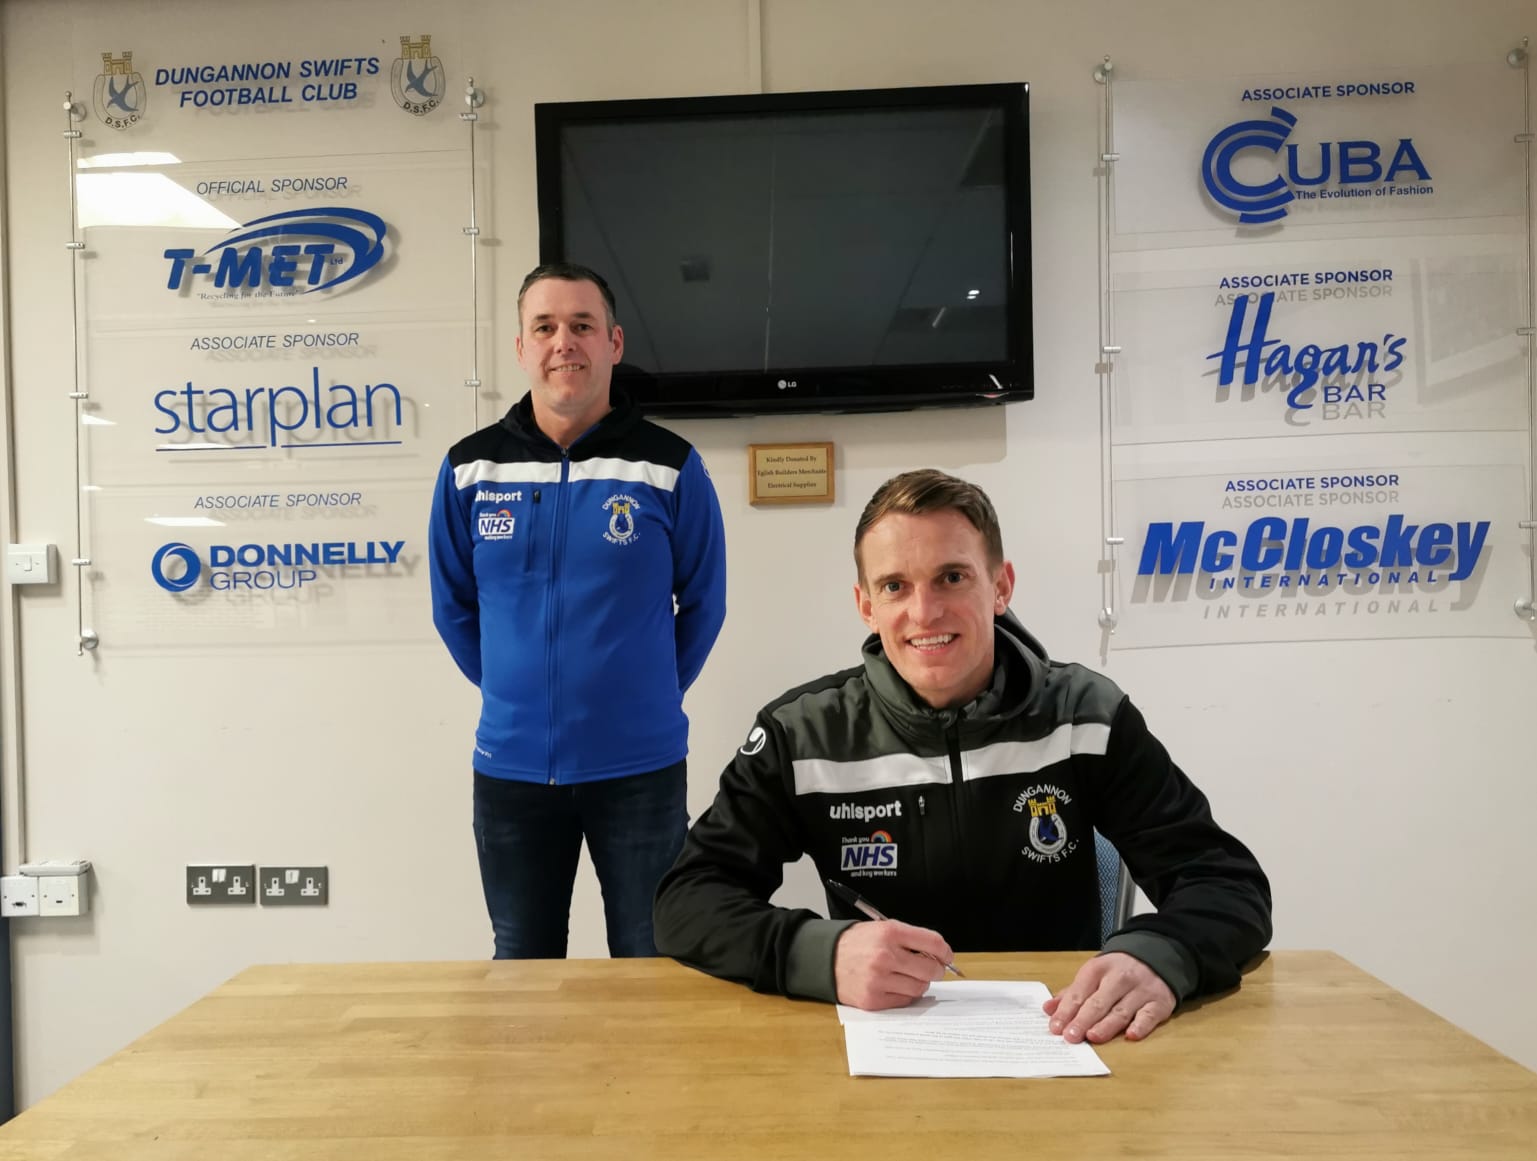 Shiels named new Dungannon Swifts boss